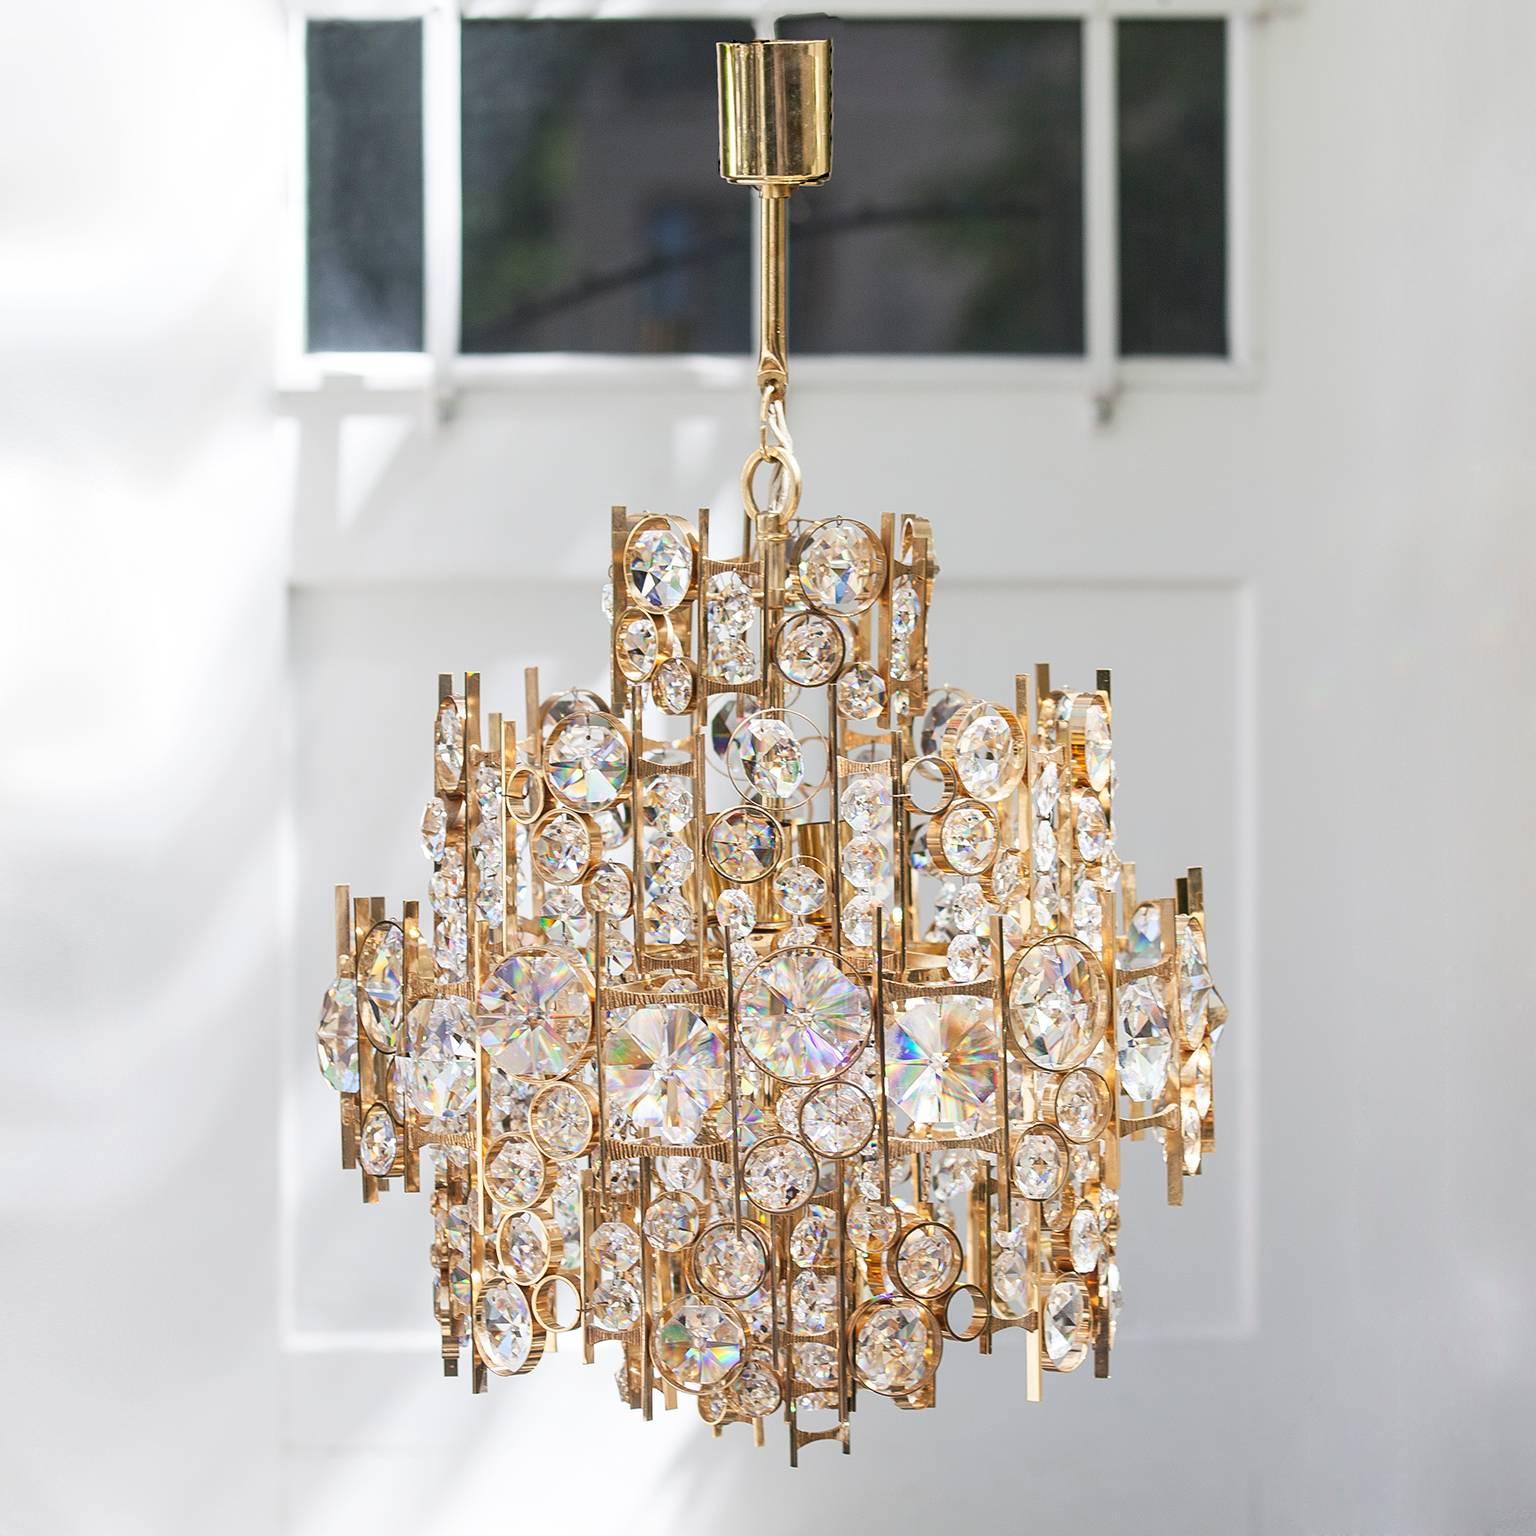 Fantastic chandelier with faceted crystal and gilded brass by Palwa, 24-karat gold-plated brass rings mounted with over 100 hand-cut and faceted crystals in three rows, creating an exquisite impression like crystaline seafoam, nine sockets. It has a